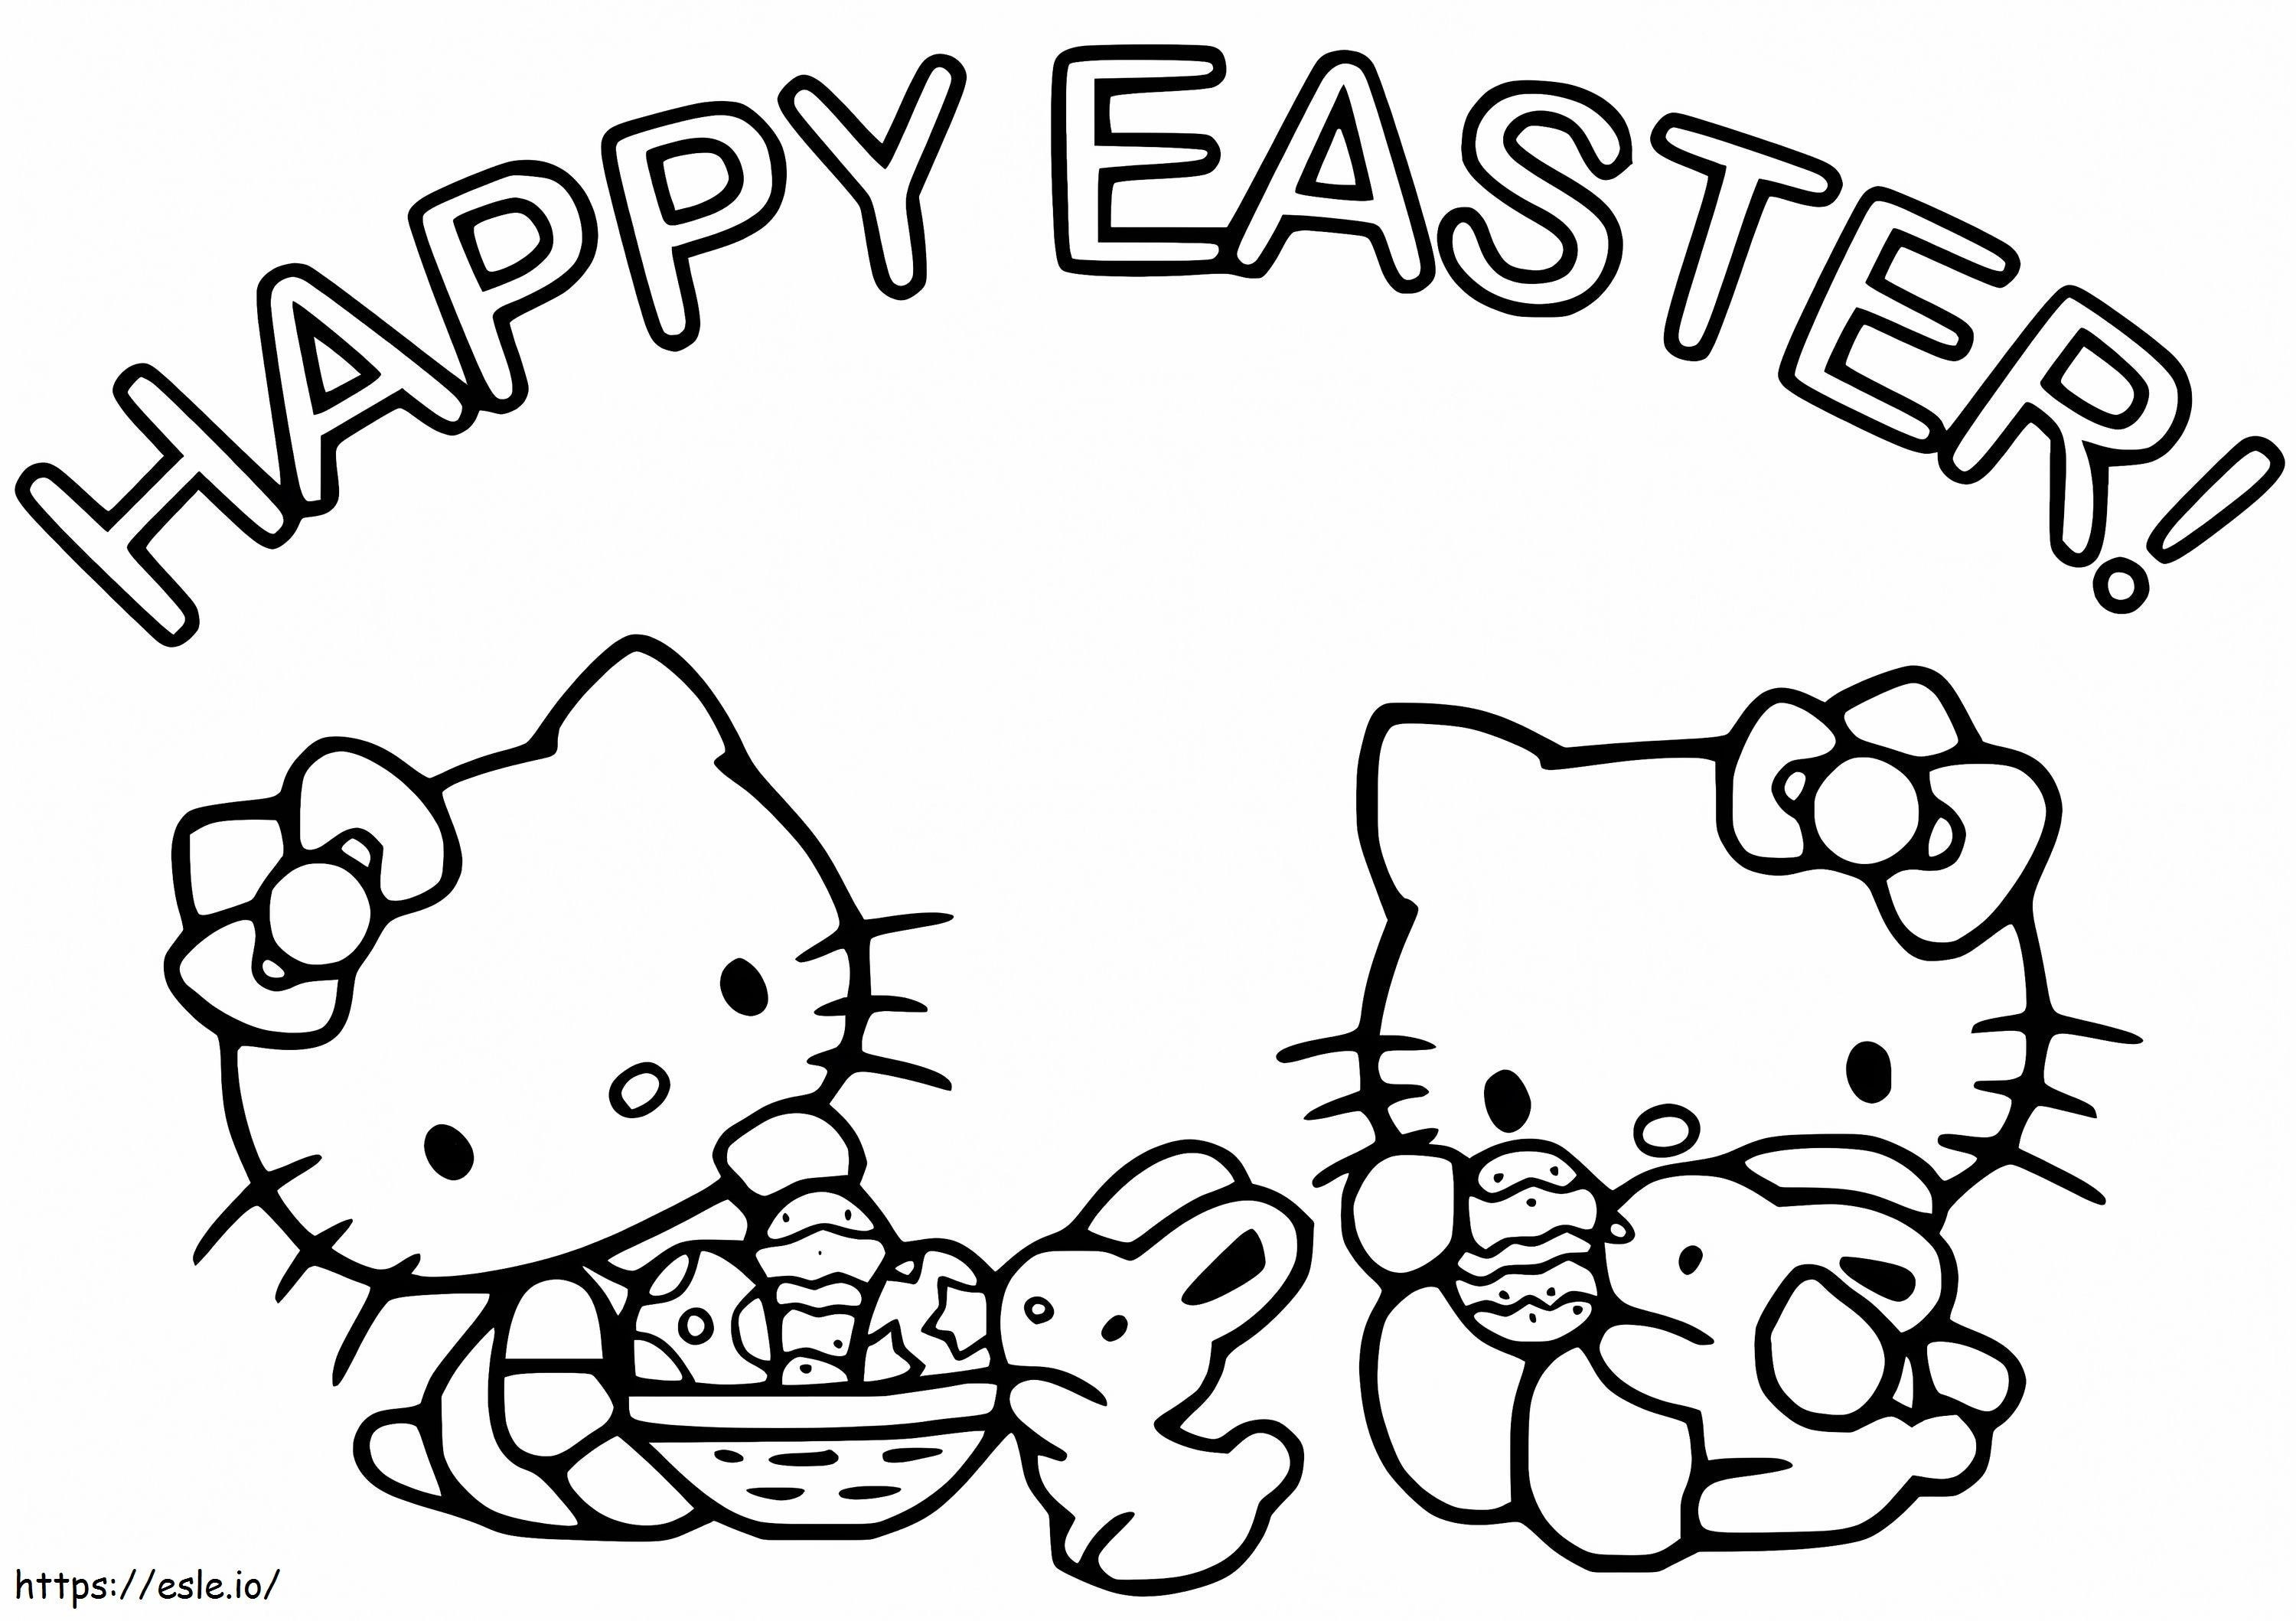 Happy Easter With Hello Kitty coloring page